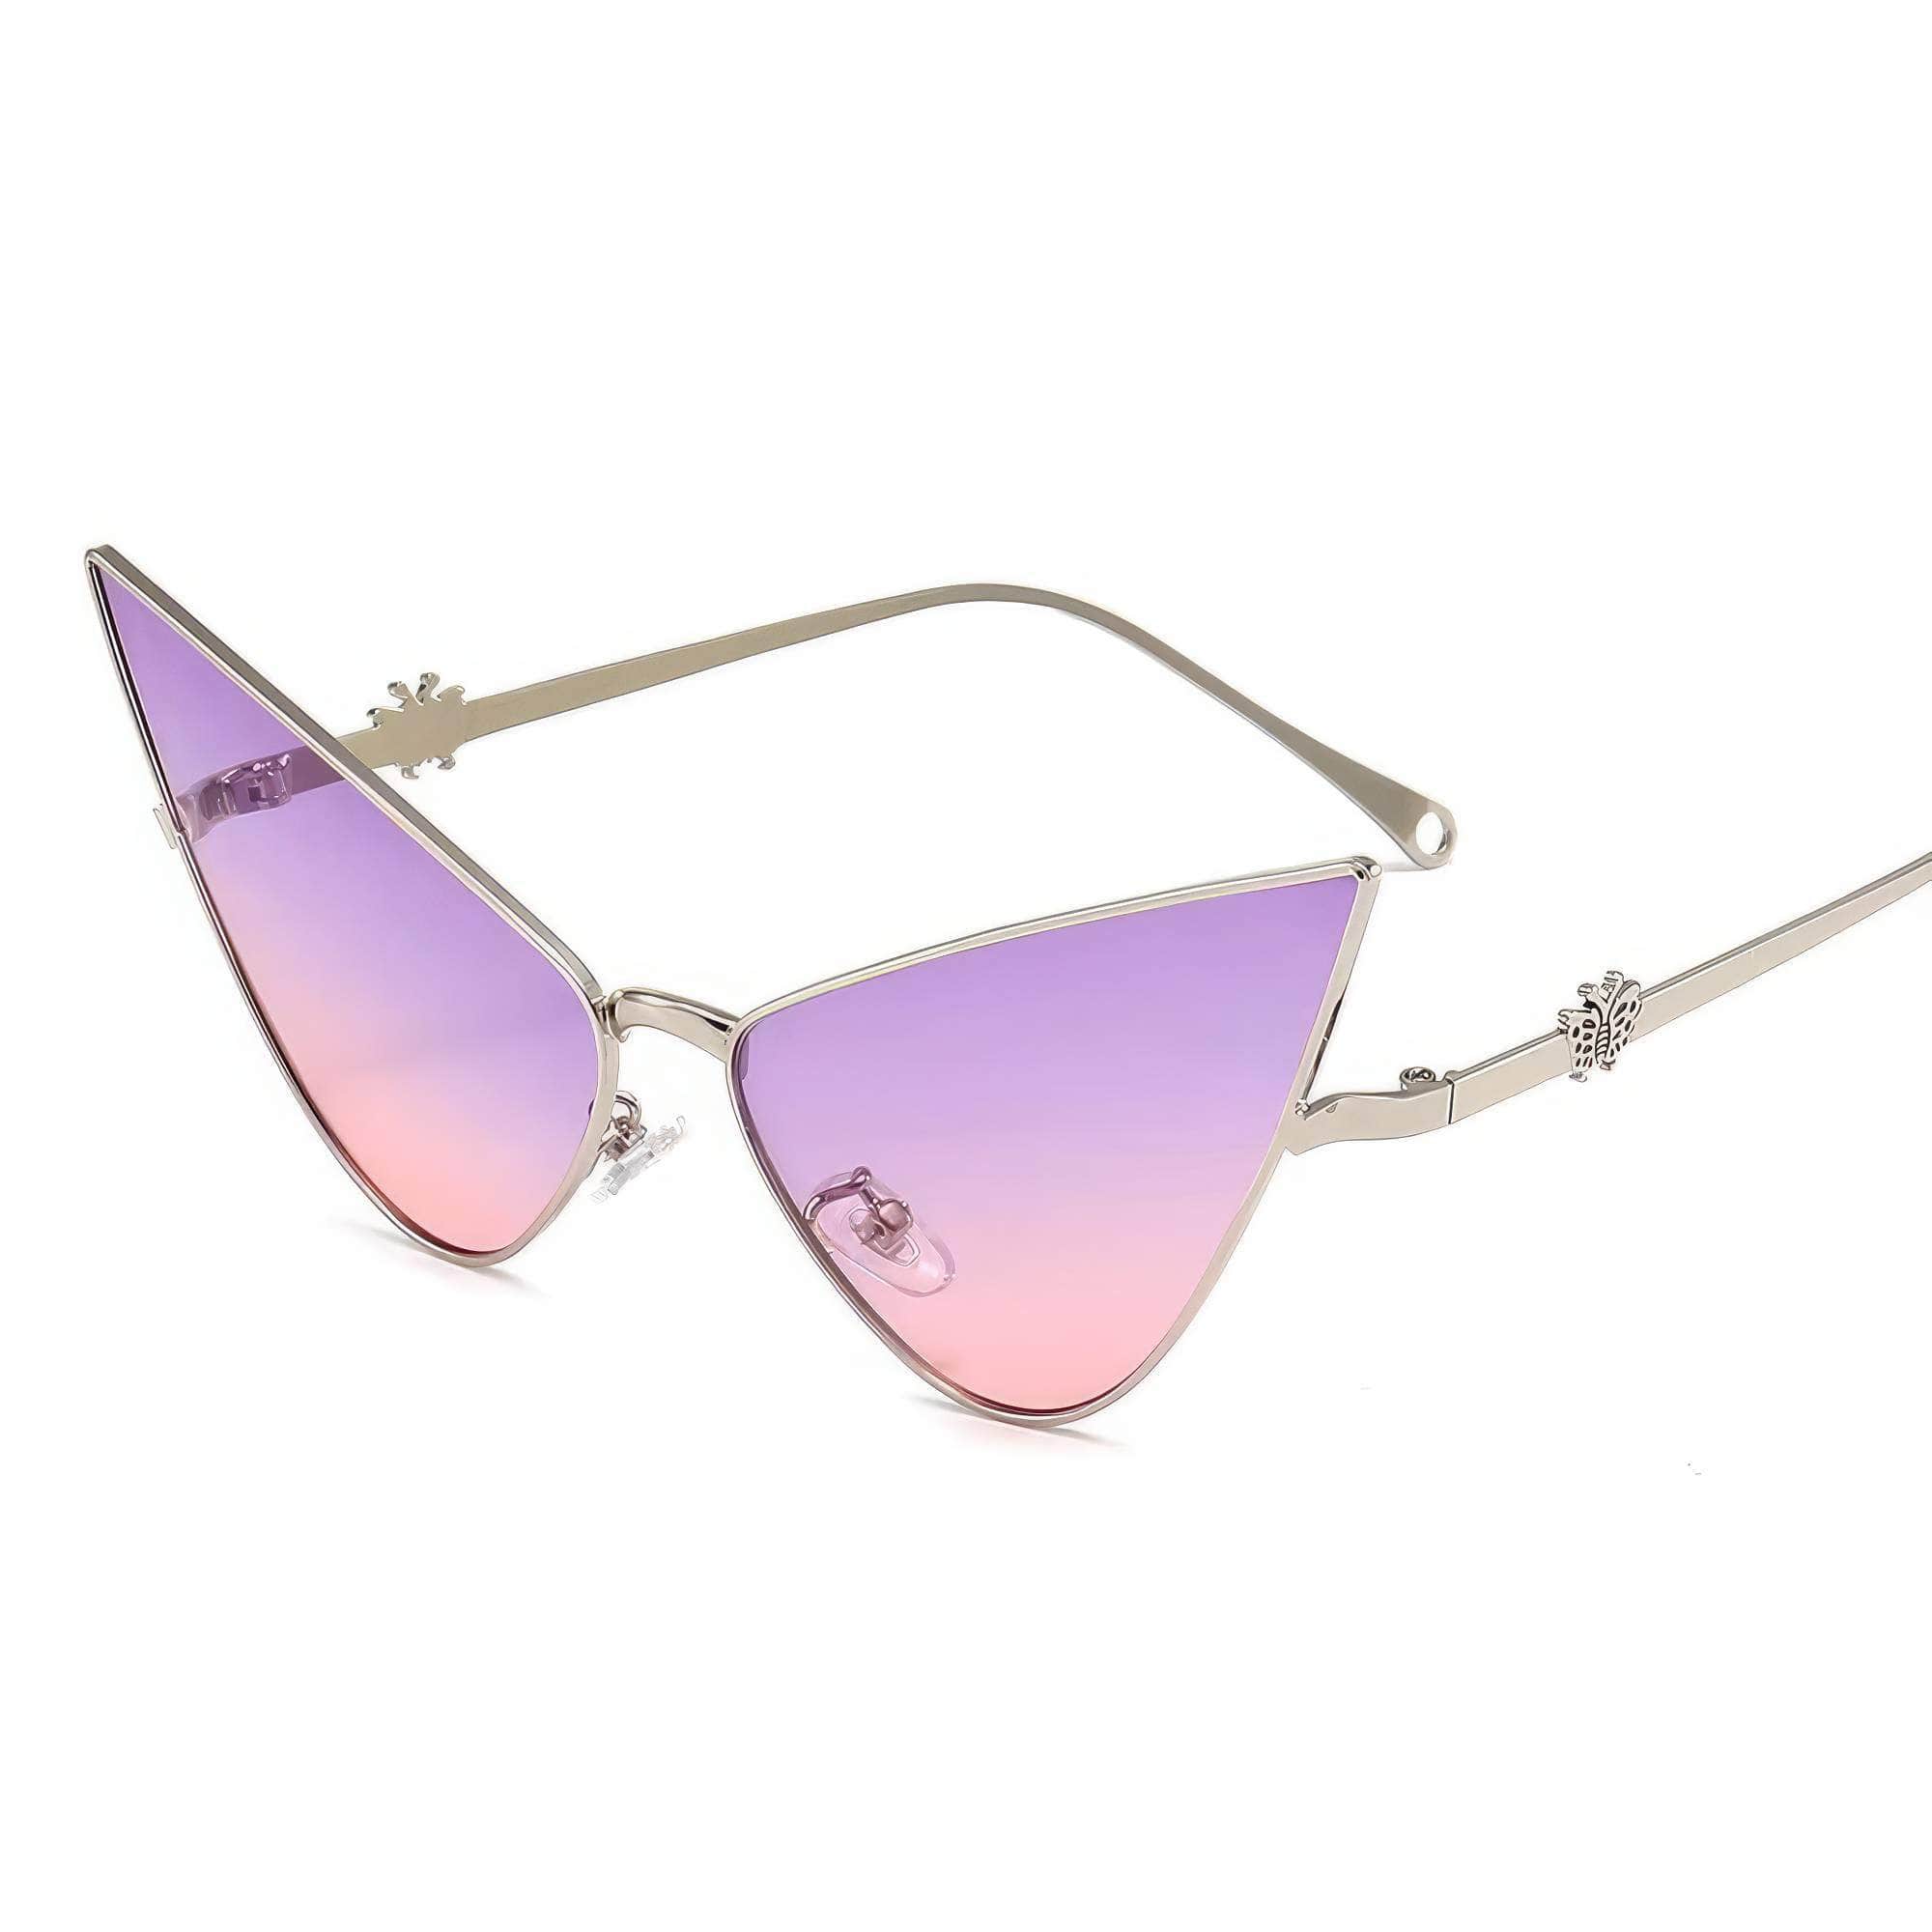 Fashion Butterfly Sunglasses Violet/Silver / Resin